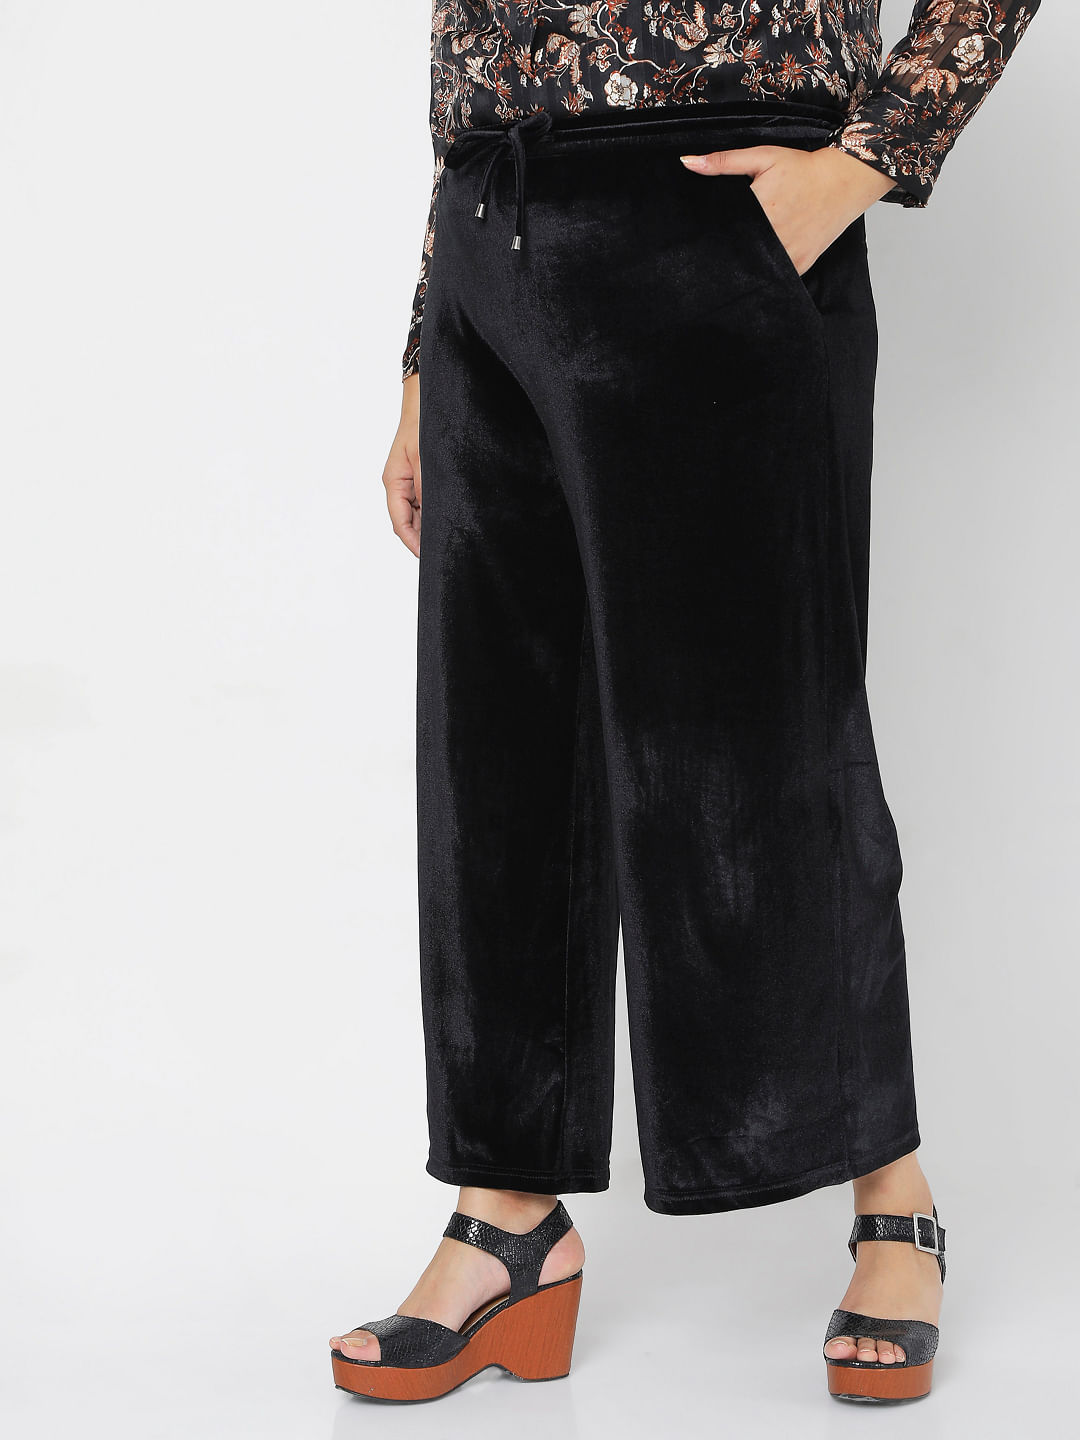 Buy online Black Velvet Palazzos from bottom wear for Women by Numbrave for  949 at 63 off  2023 Limeroadcom